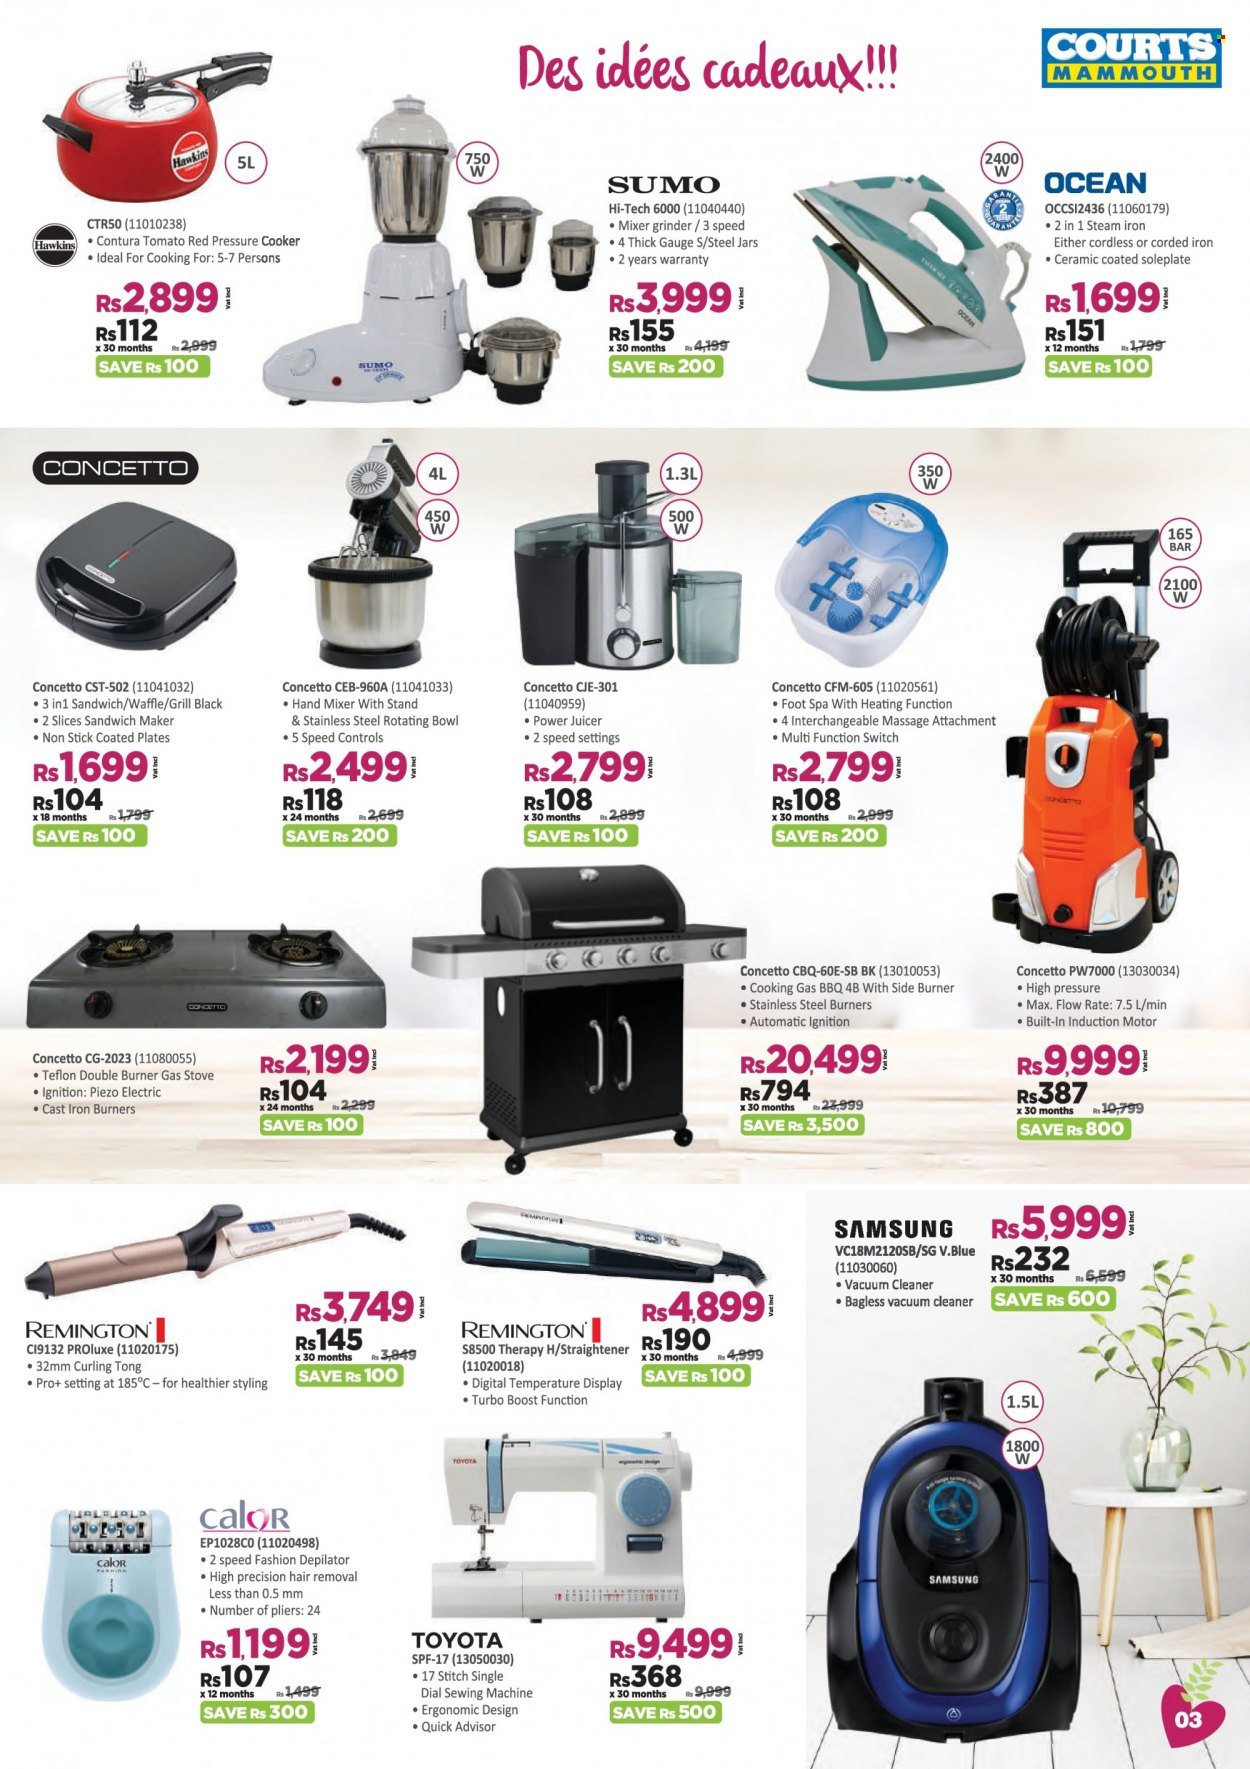 Courts Mammouth Catalogue - 1.05.2022 - 19.05.2022 - Sales products - plate, pressure cooker, Samsung, gas stove, vacuum cleaner, mixer, hand mixer, sandwich maker, juicer, steam iron, sewing machine, grinder, depilator, Remington. Page 3.